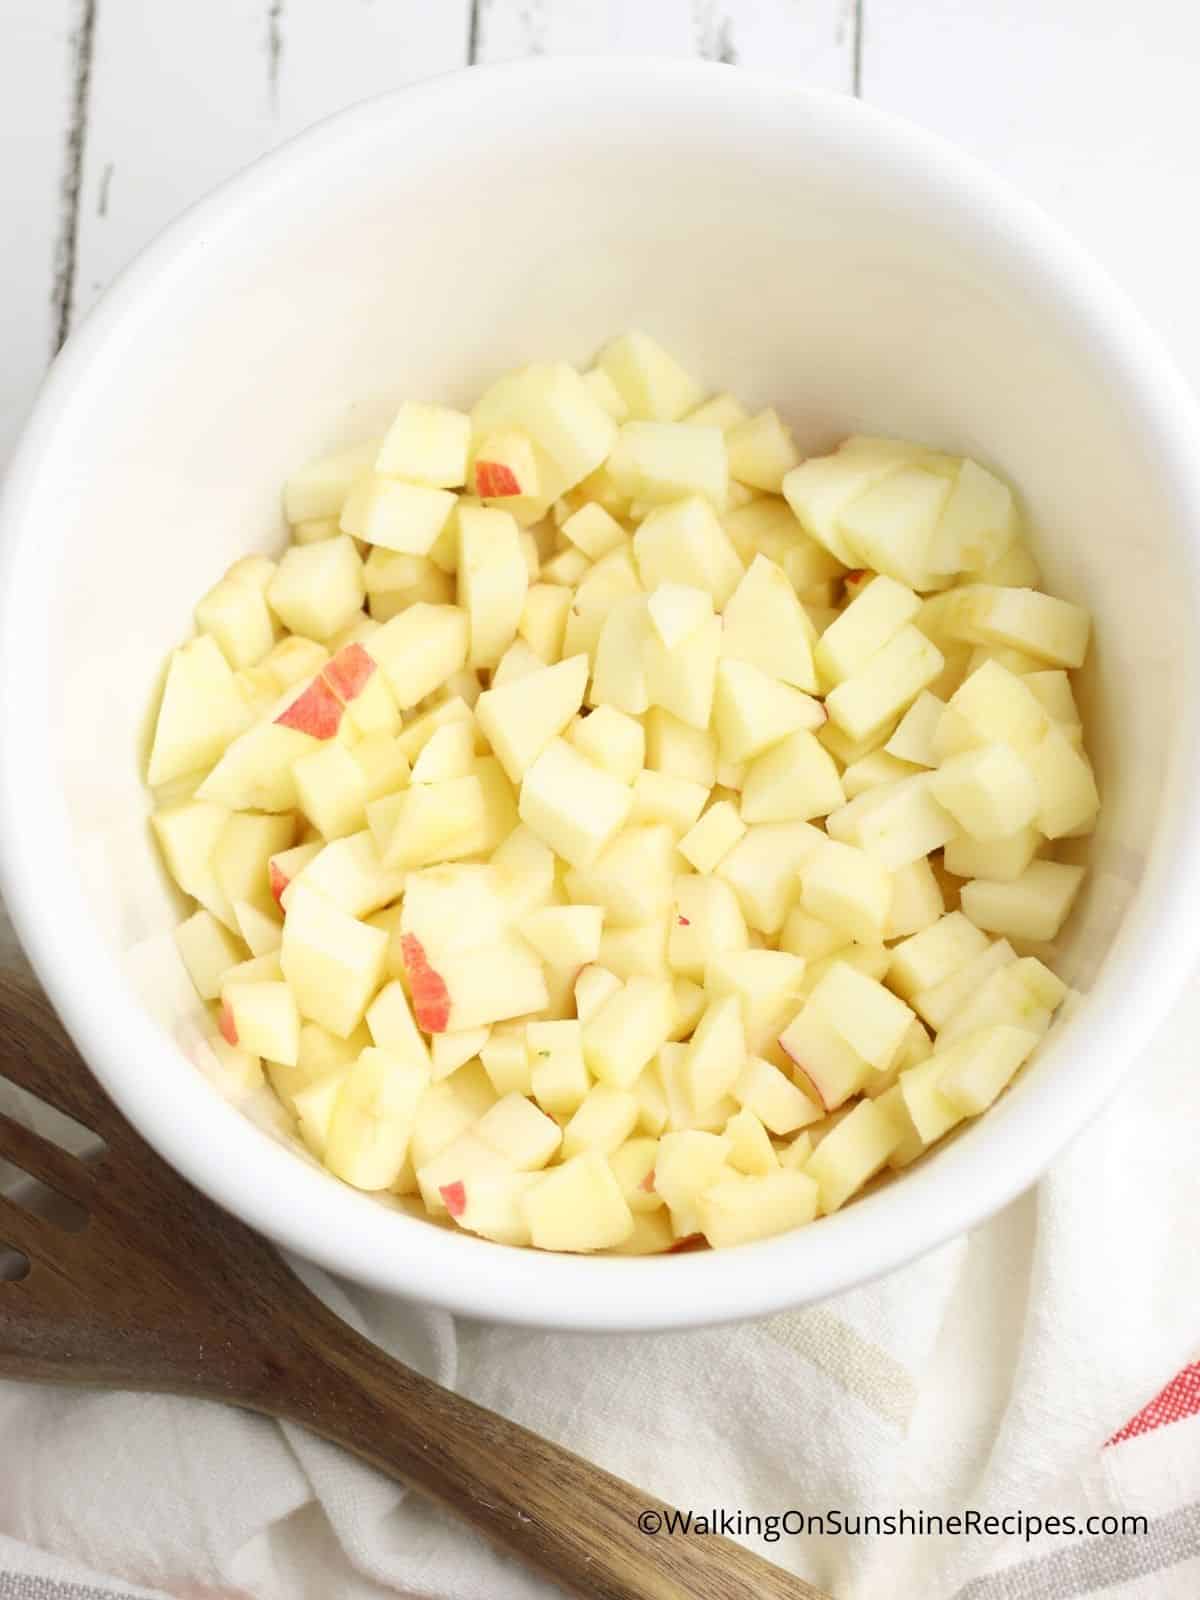 chopped apples in white bowl.